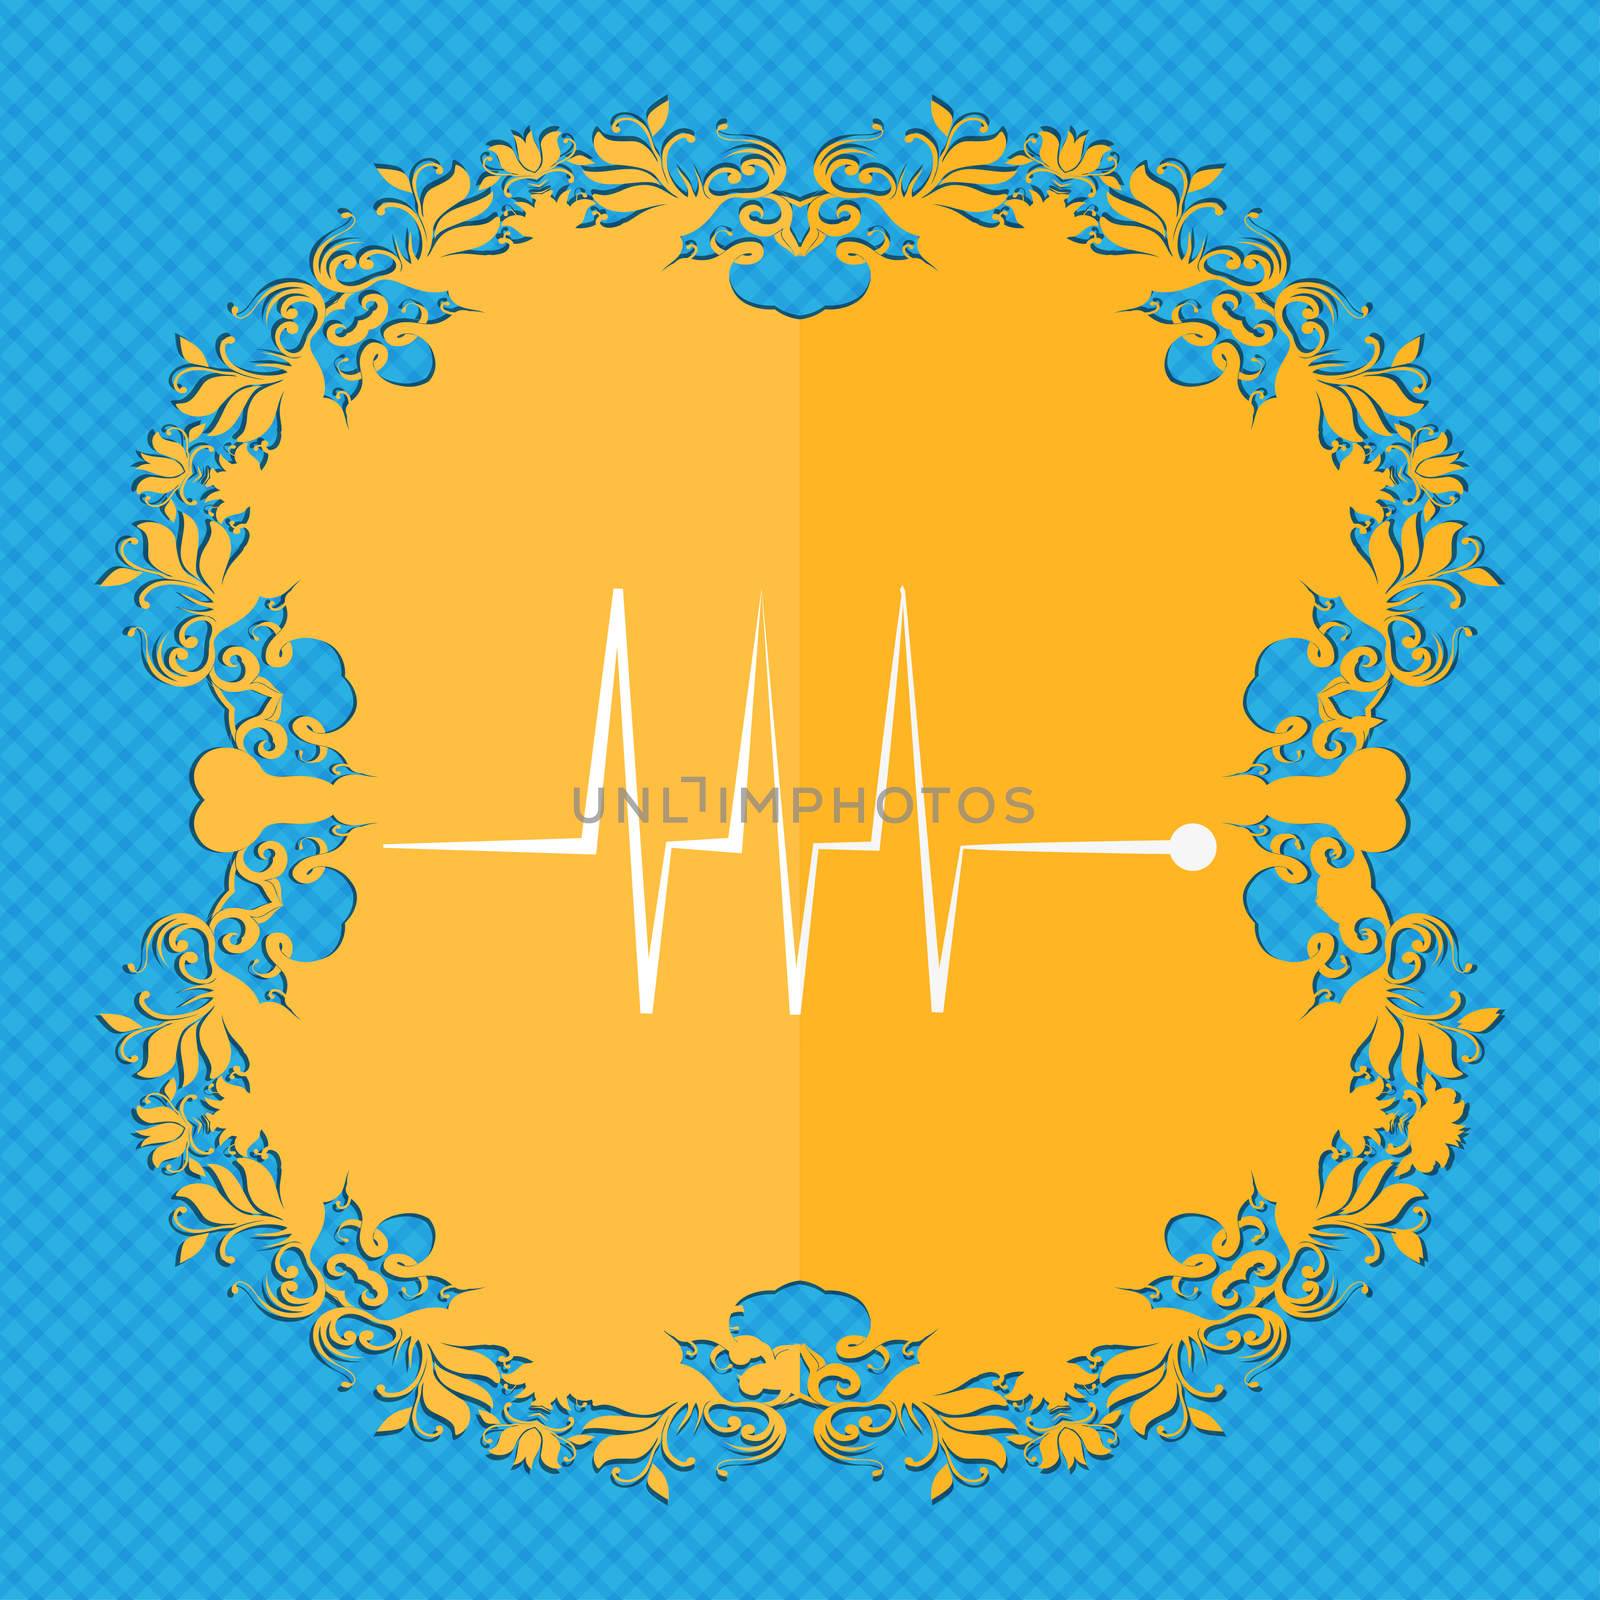 Cardiogram monitoring sign icon. Heart beats symbol. Floral flat design on a blue abstract background with place for your text. illustration